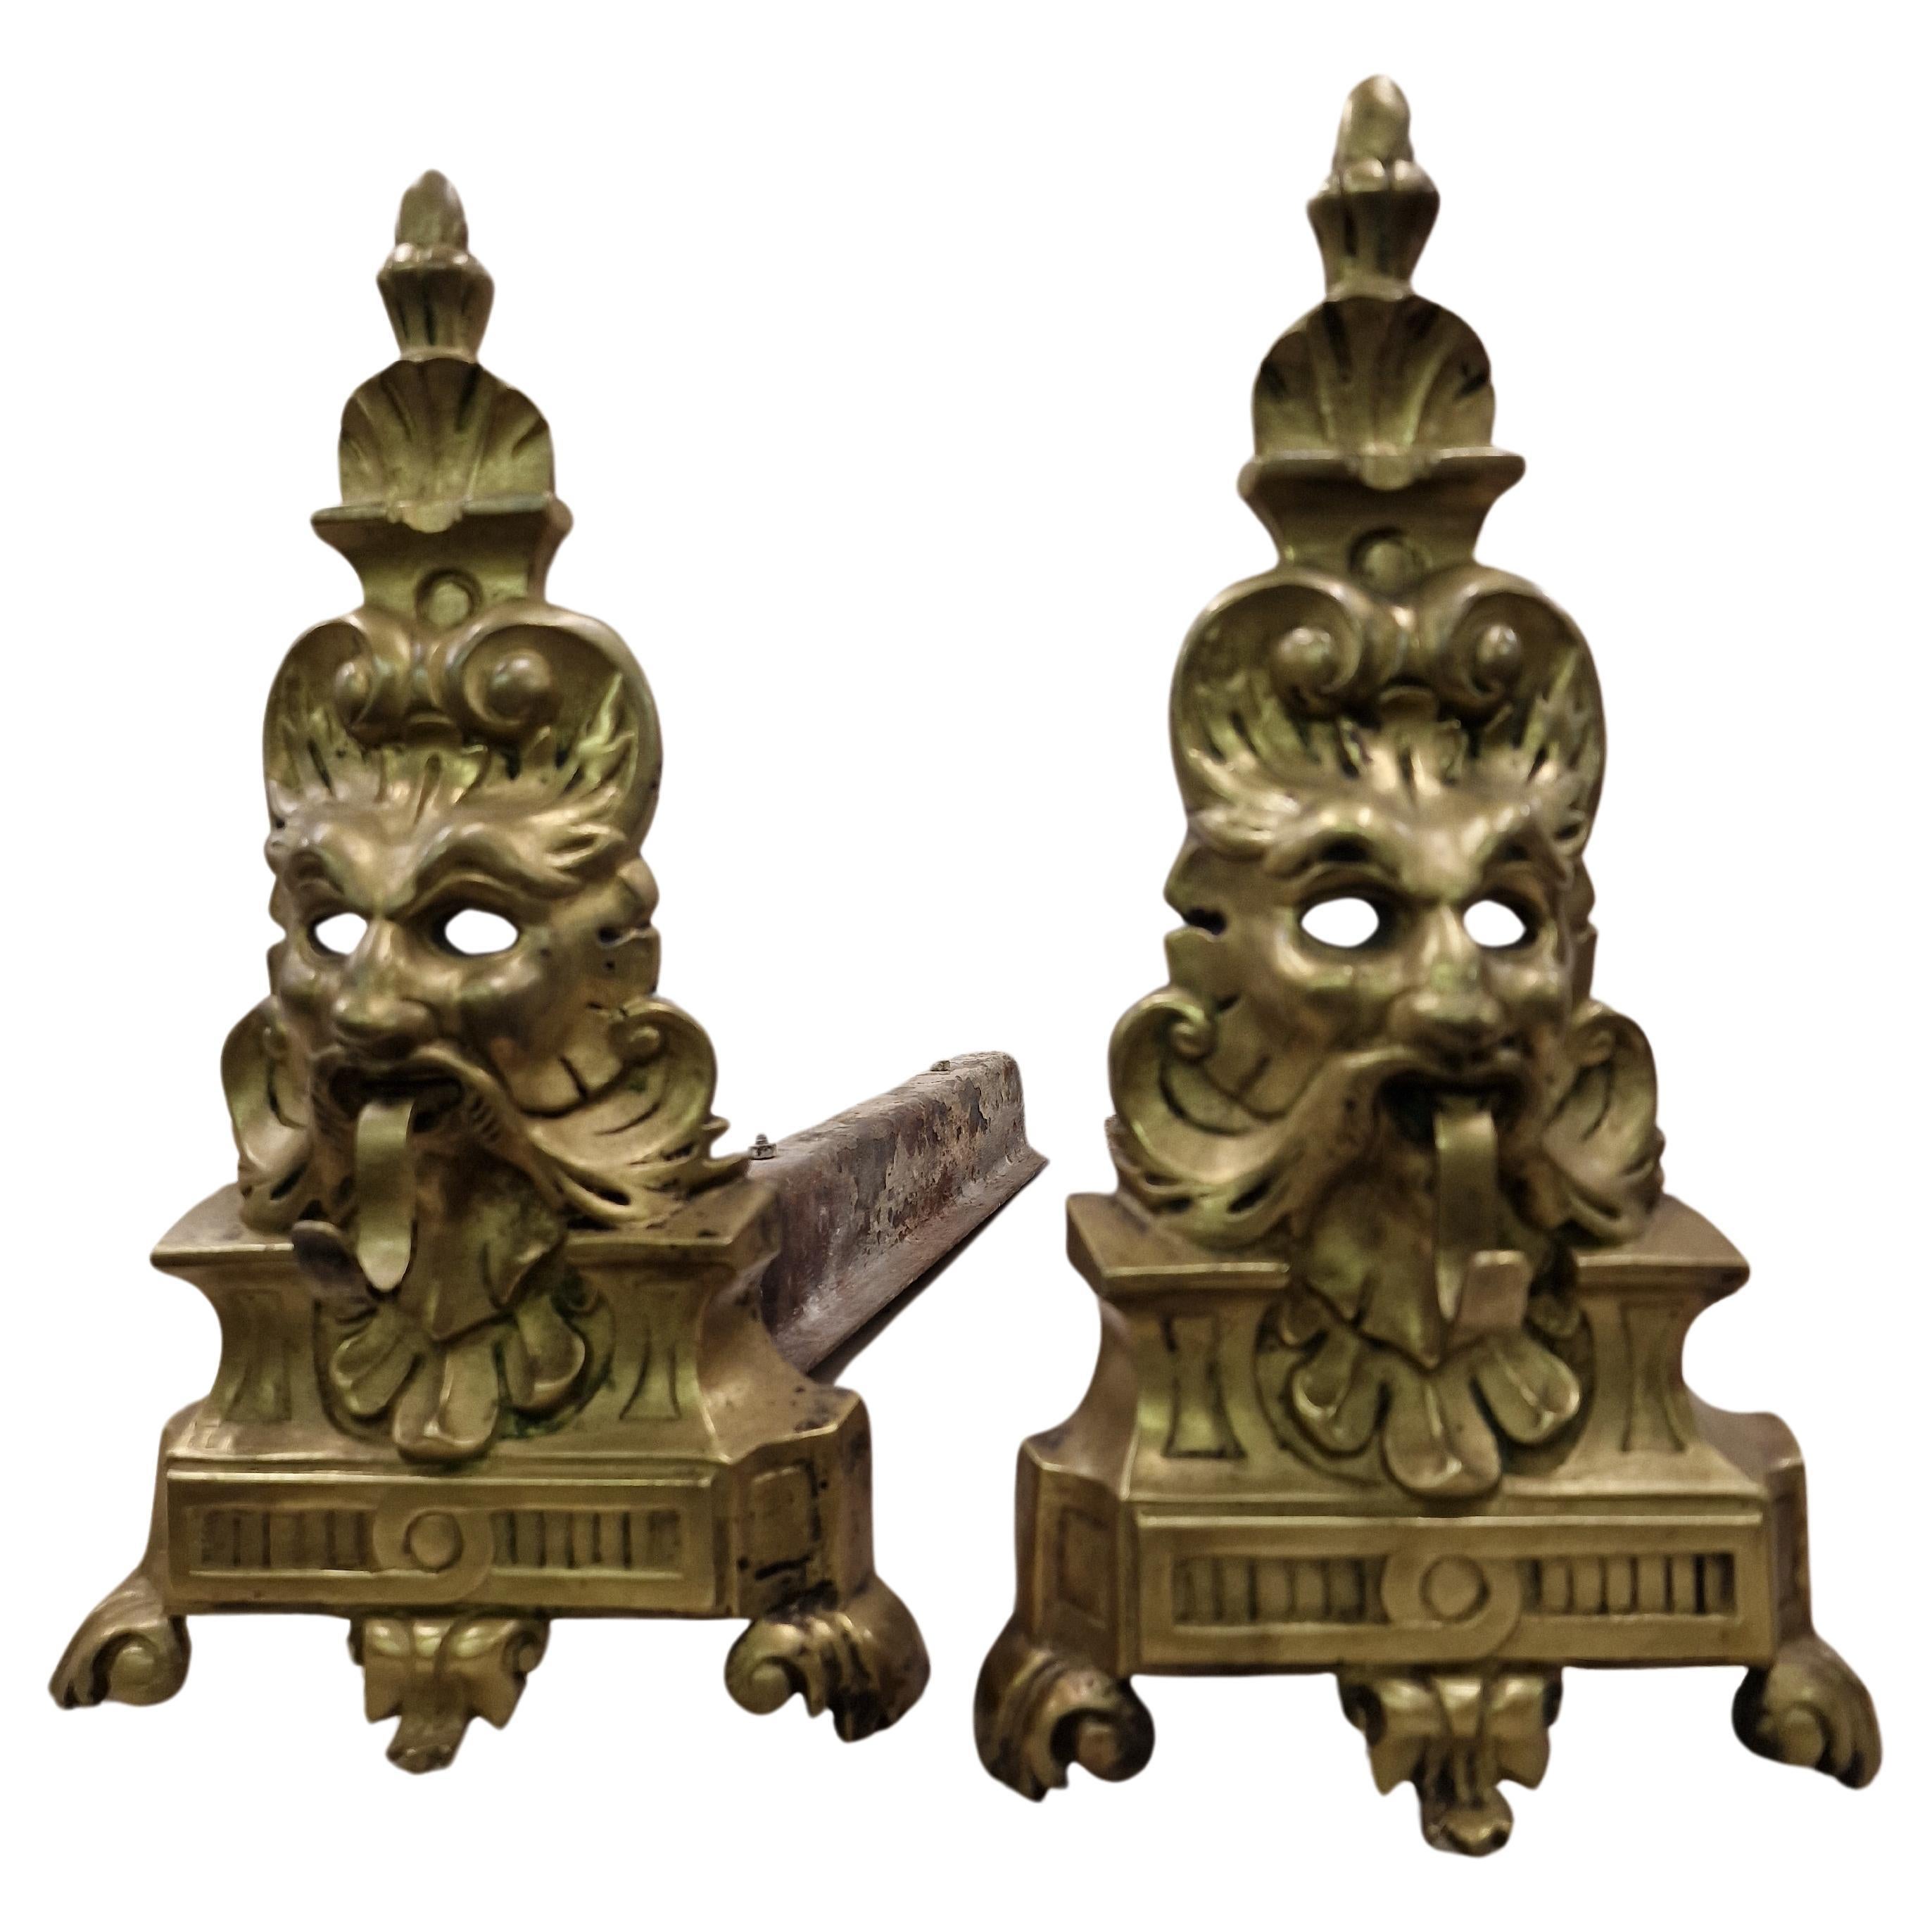 Magnificent original fireplace presenter, chimney heating, grotesque 1870 France